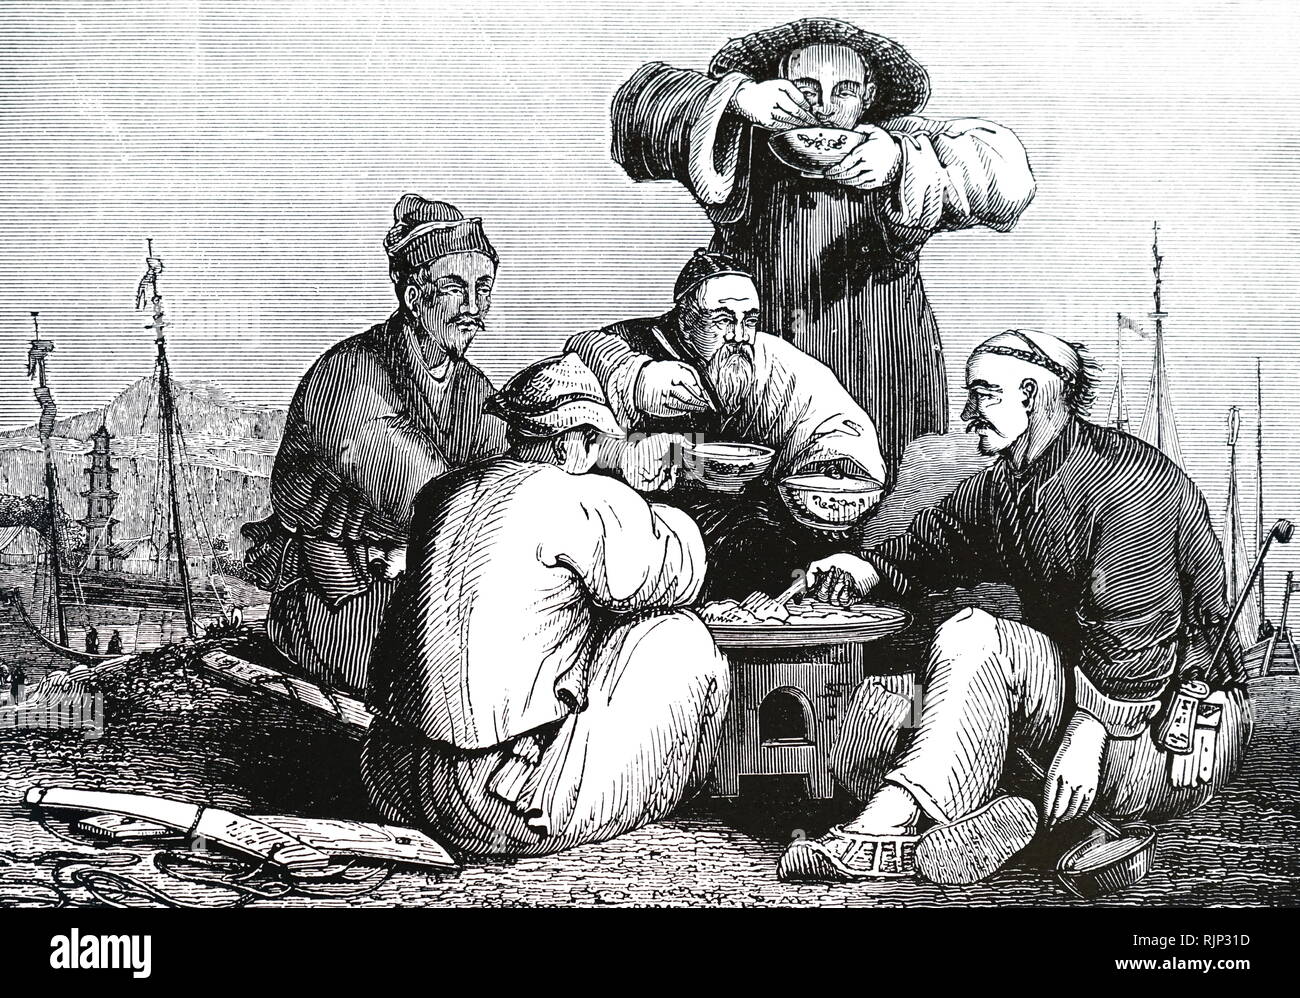 Engraving depicting Chinese porters cooking and eating around a portable stove. Dated 19th century Stock Photo